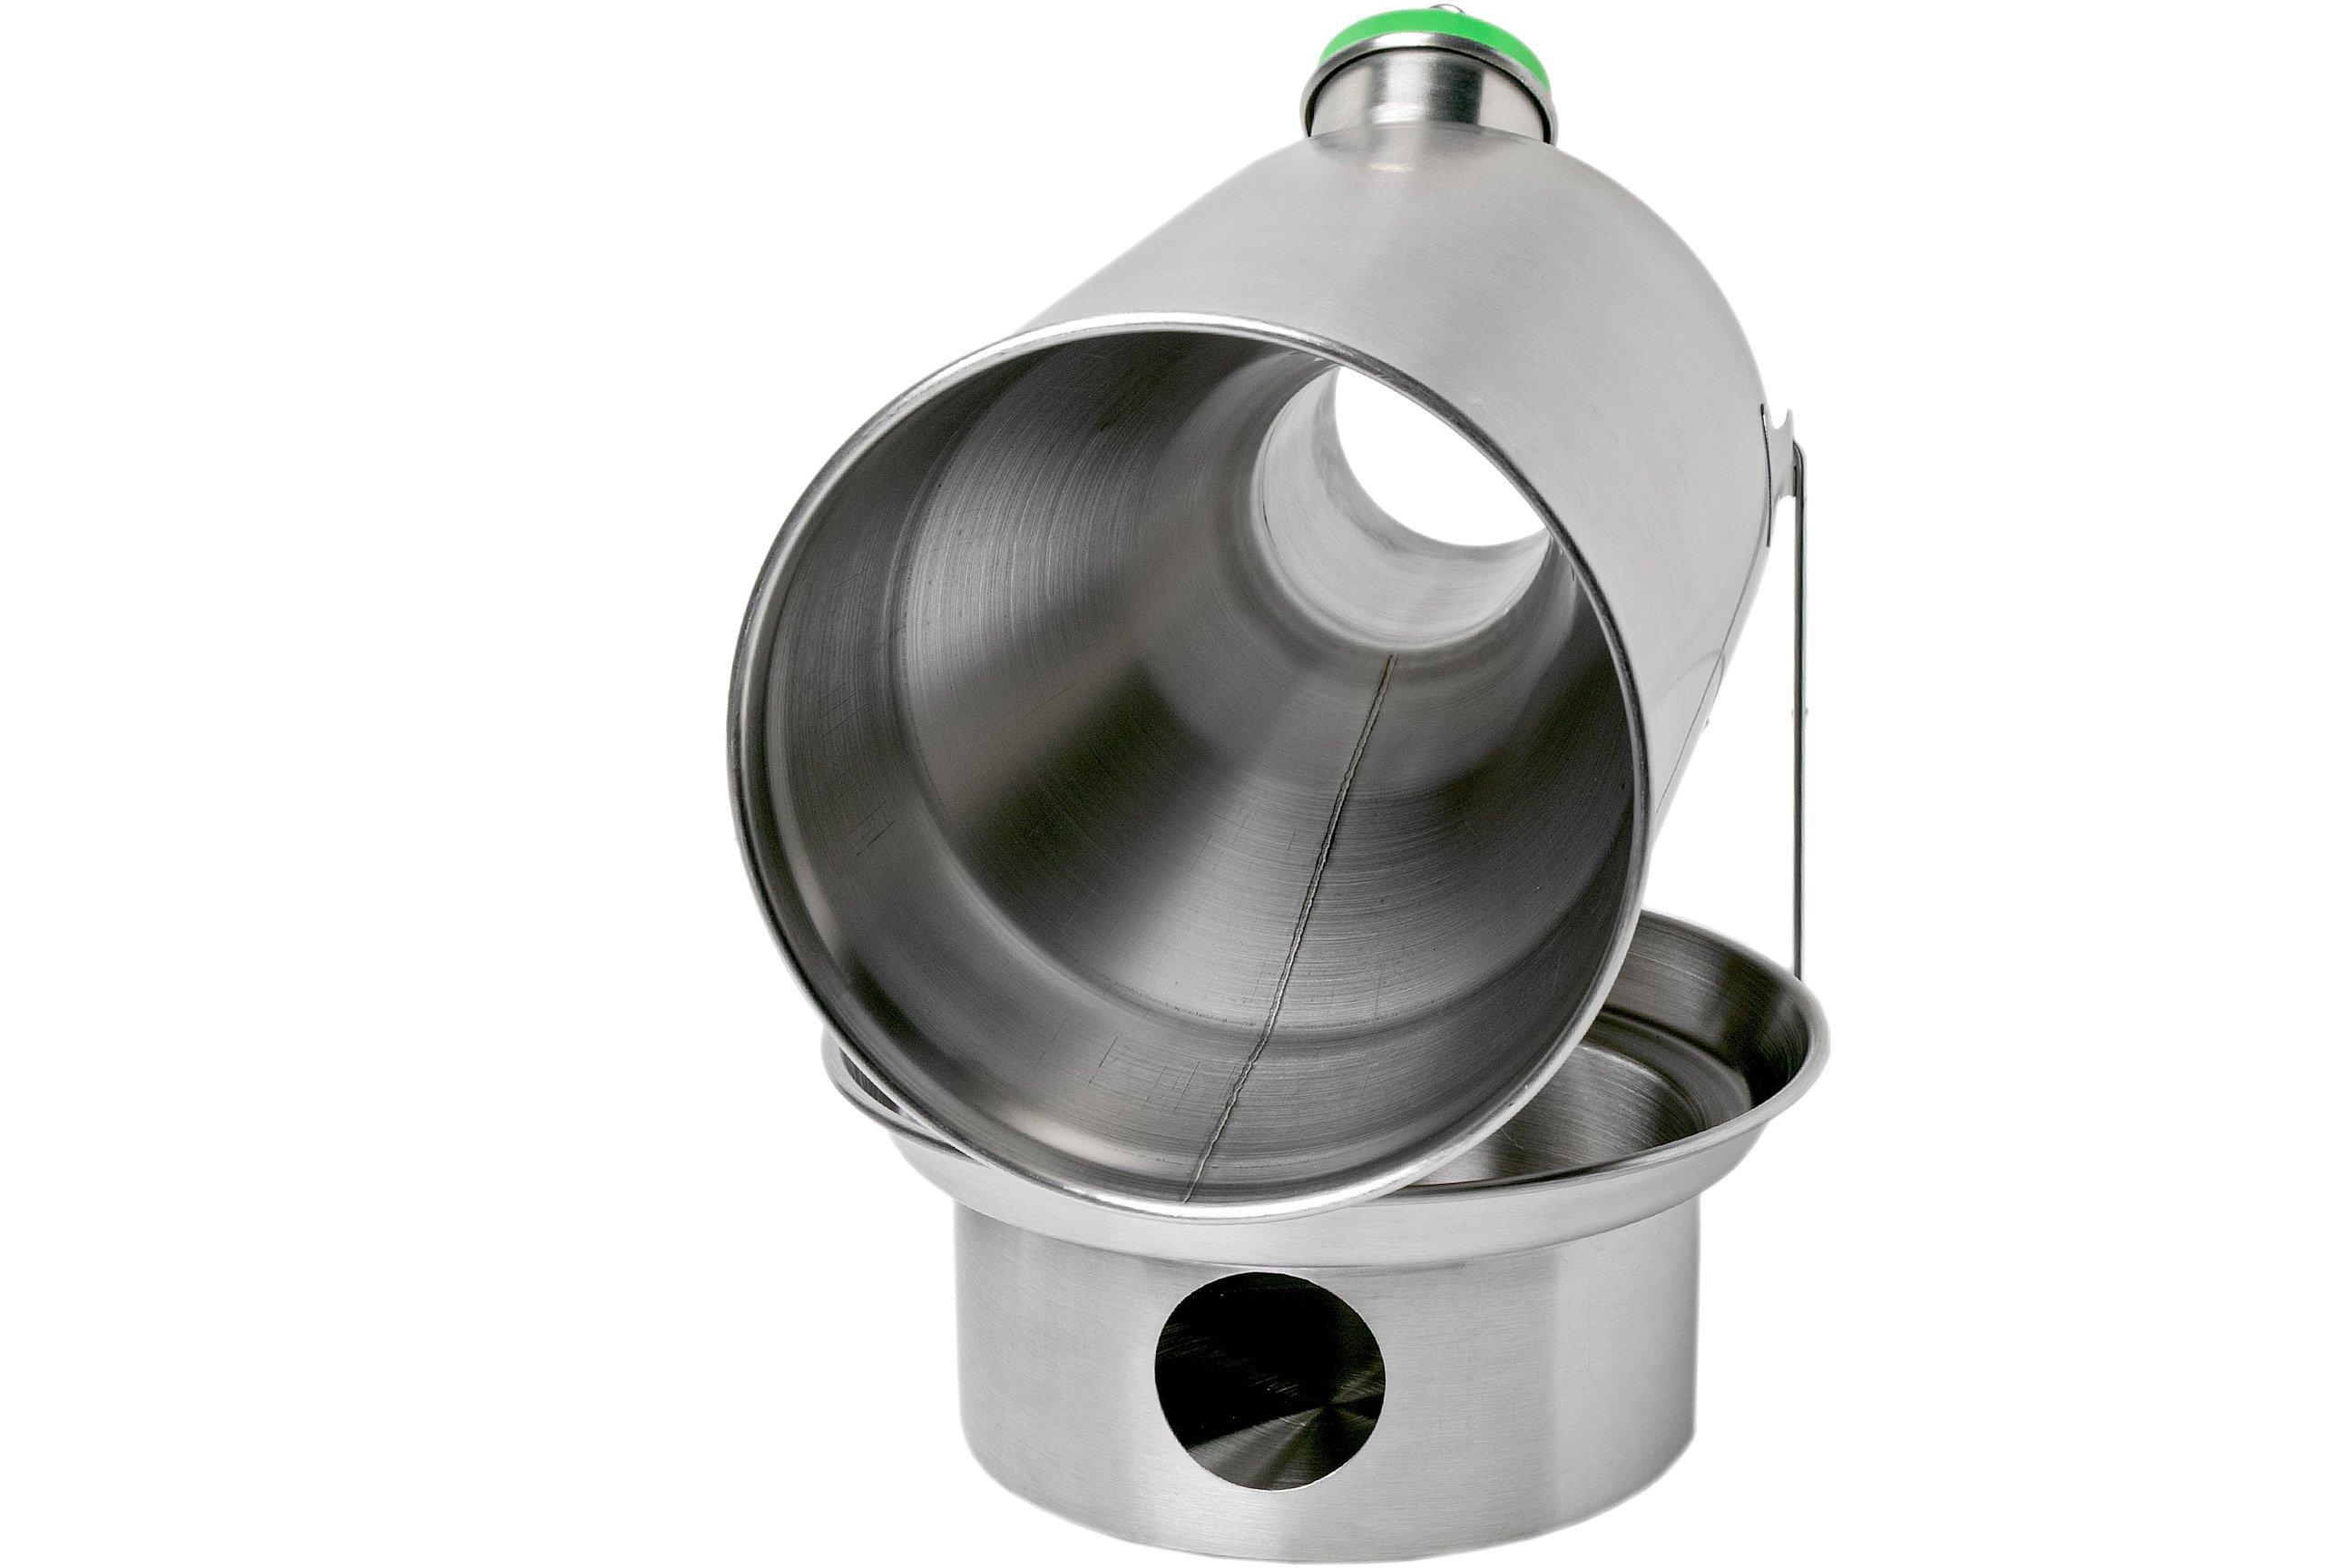 Kelly Kettle Stainless Steel Camping Cups